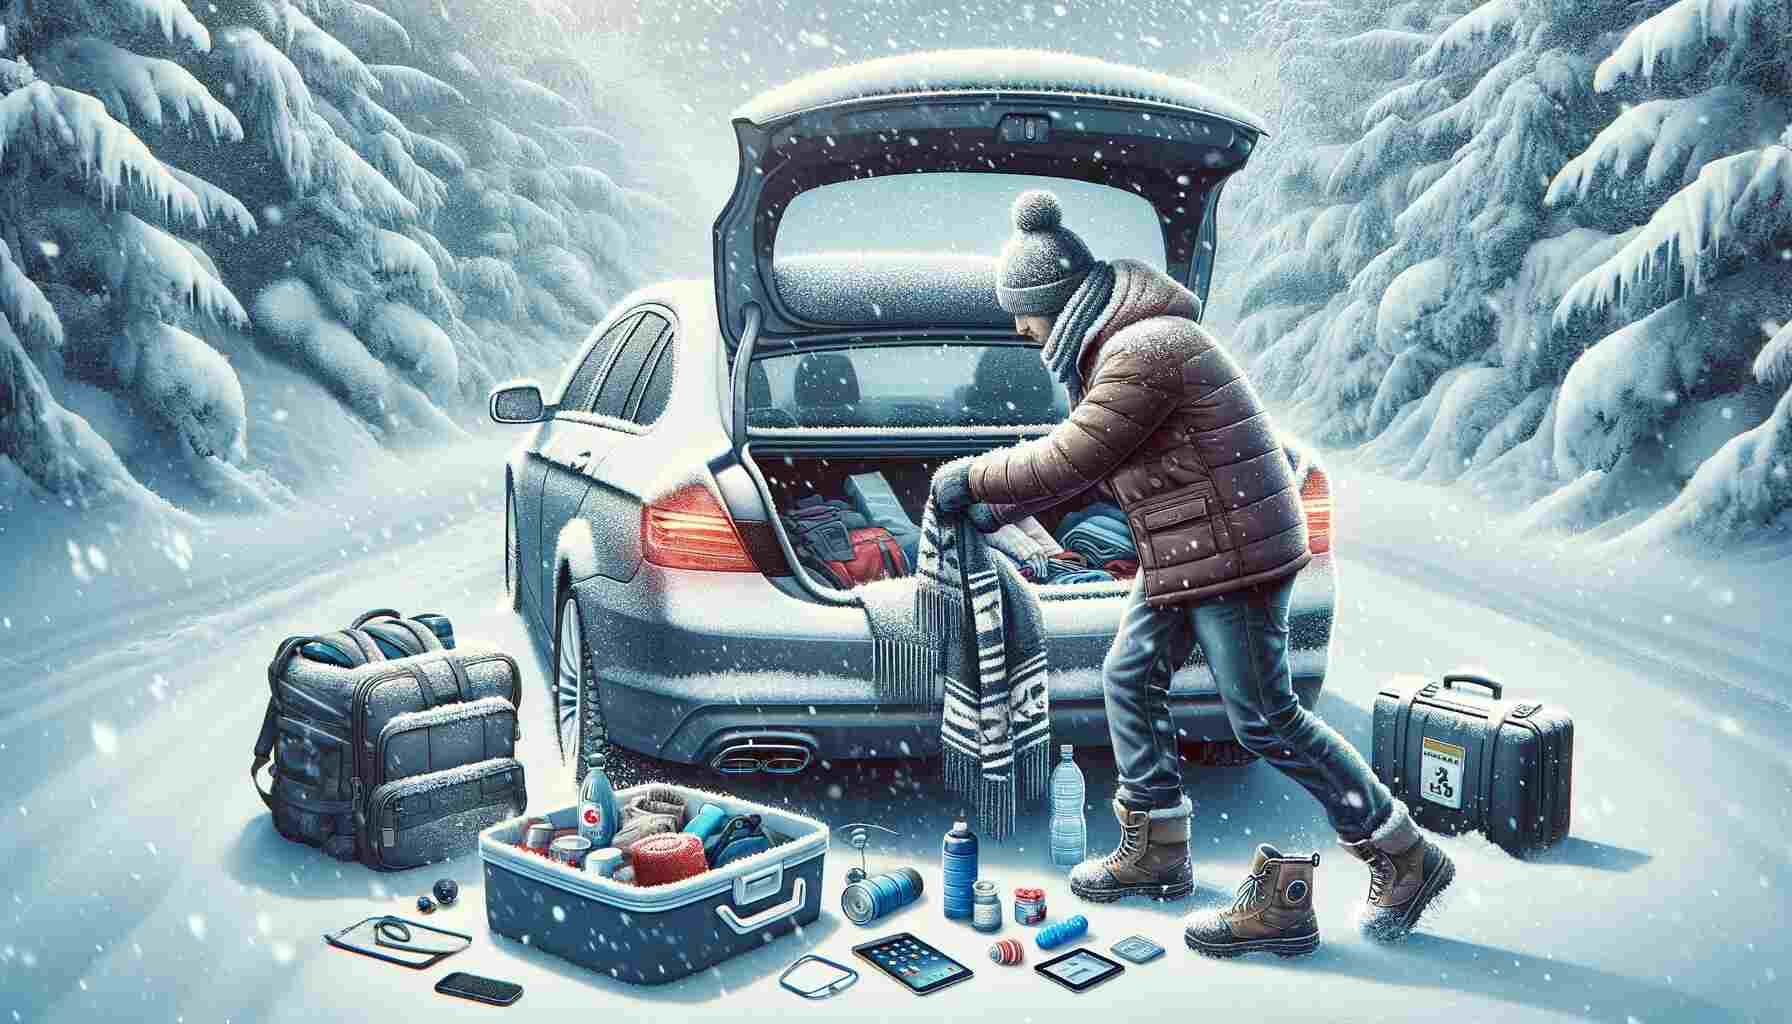 Image showing a person removing items from their snow-covered car in a winter setting. The car is parked in a snowy environment, with snowflakes falling around. The individual, dressed in winter clothing, is taking out a water bottle, blanket, and electronics from the trunk. In the background, there are snow-covered trees under a grey, overcast sky.